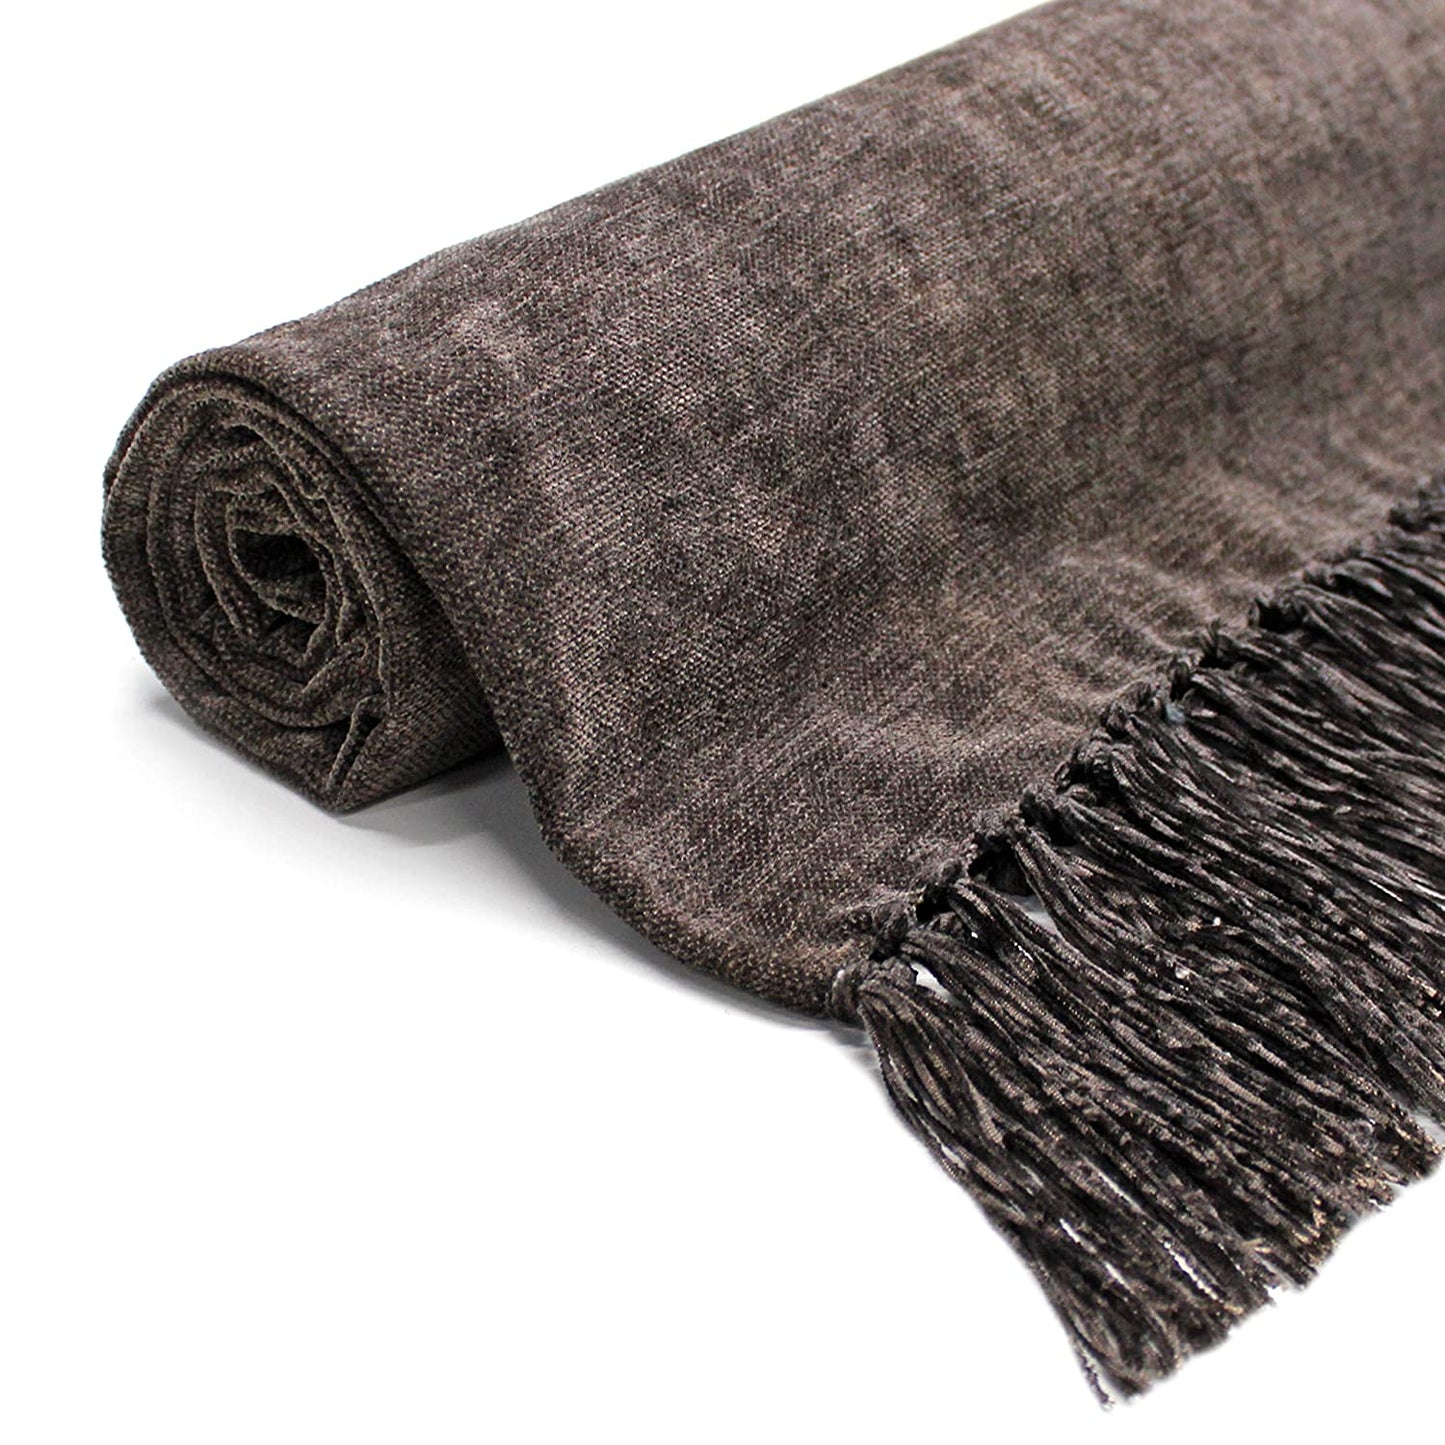 Loomsmith-Soft-Chenille-Throw-For-Sofa-of-grey-color-with-beautiful-tassels-for-sofa-elegant-look